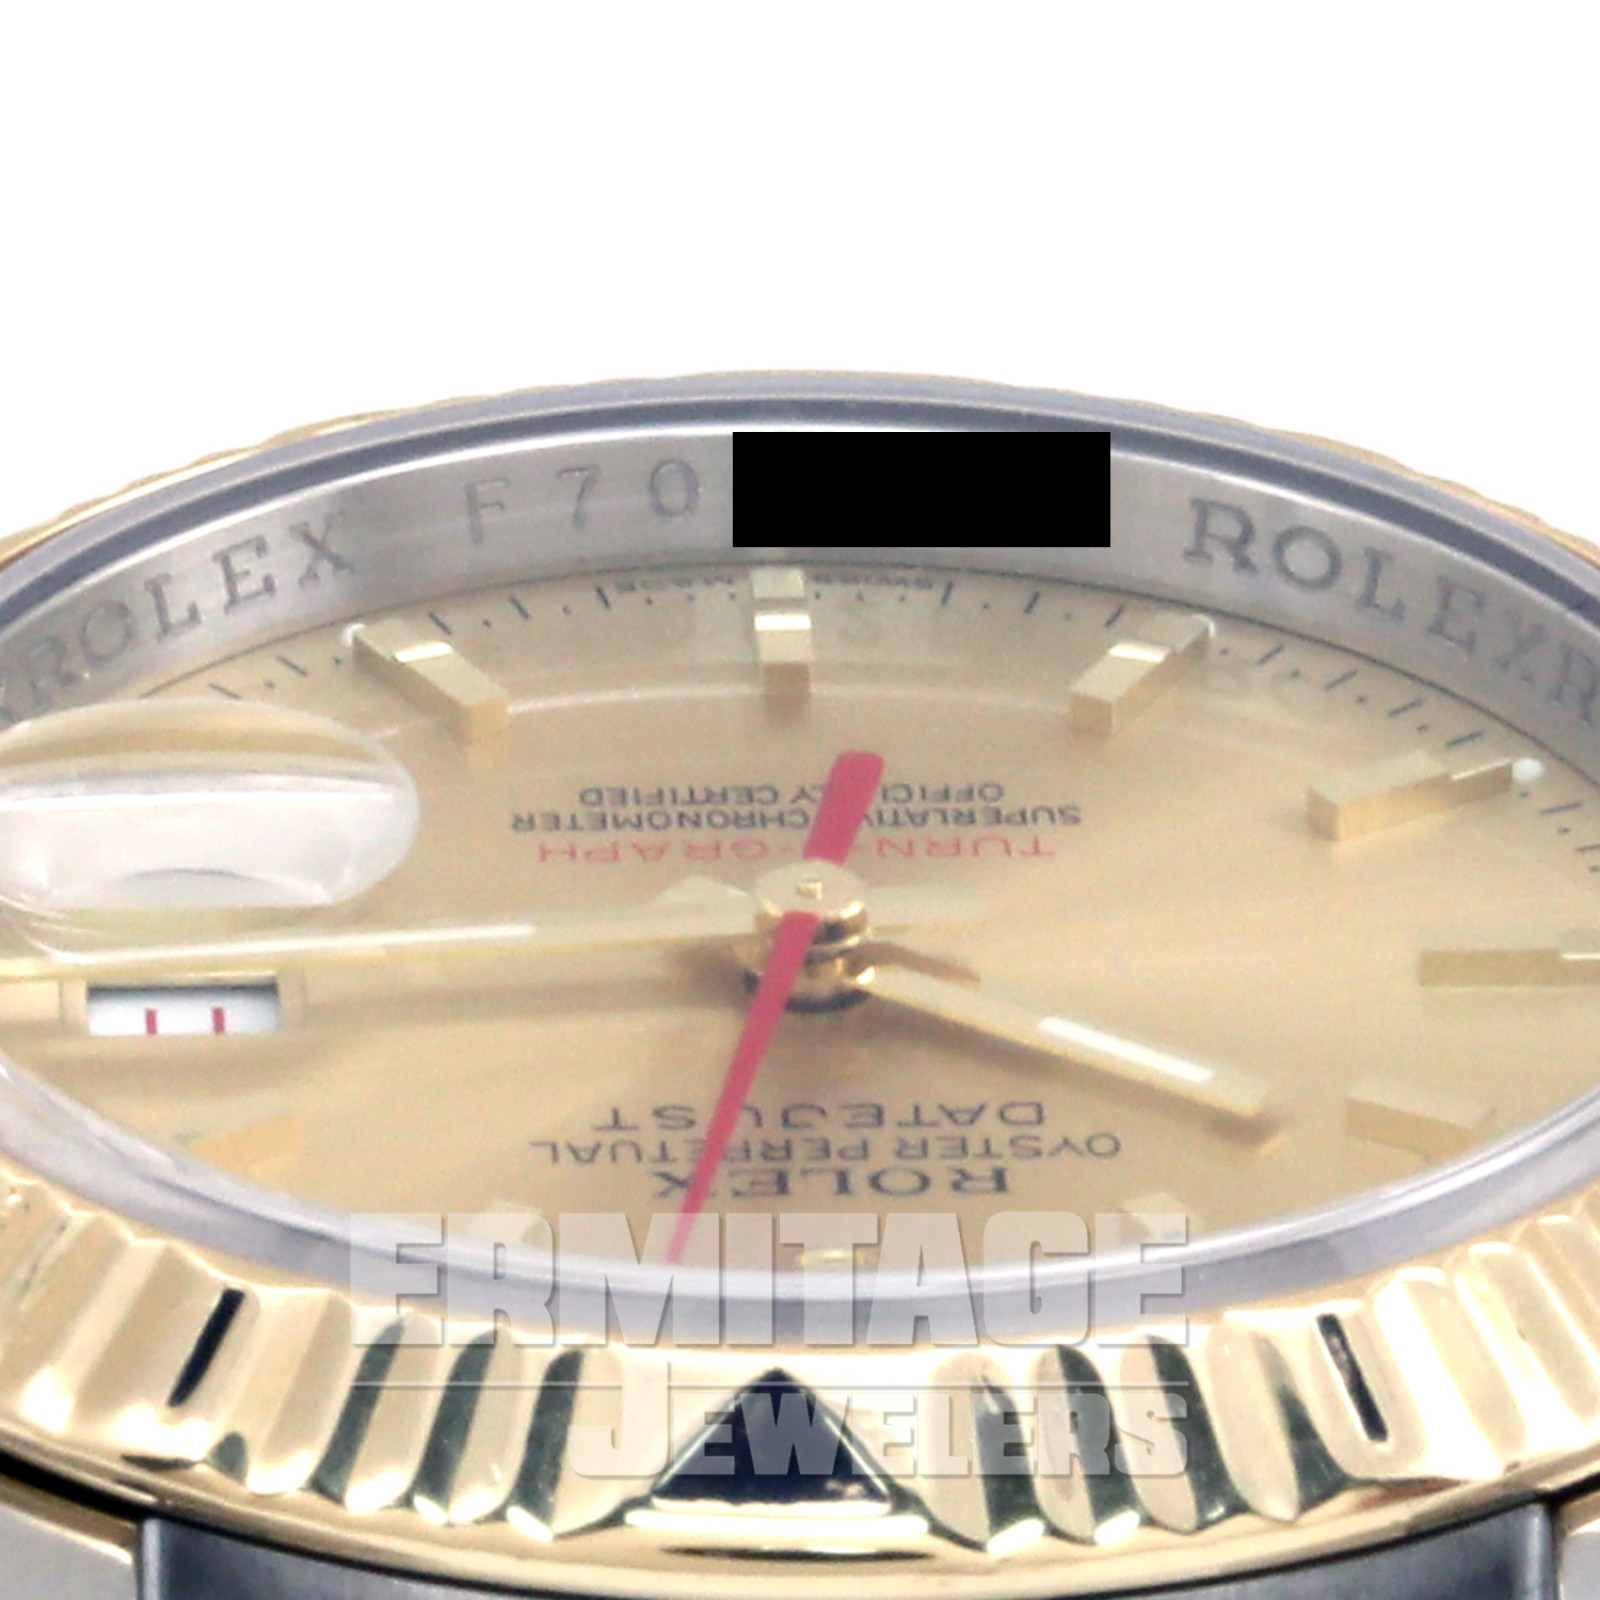 Sell Your Rolex Datejust Turn-O-Graph 116263